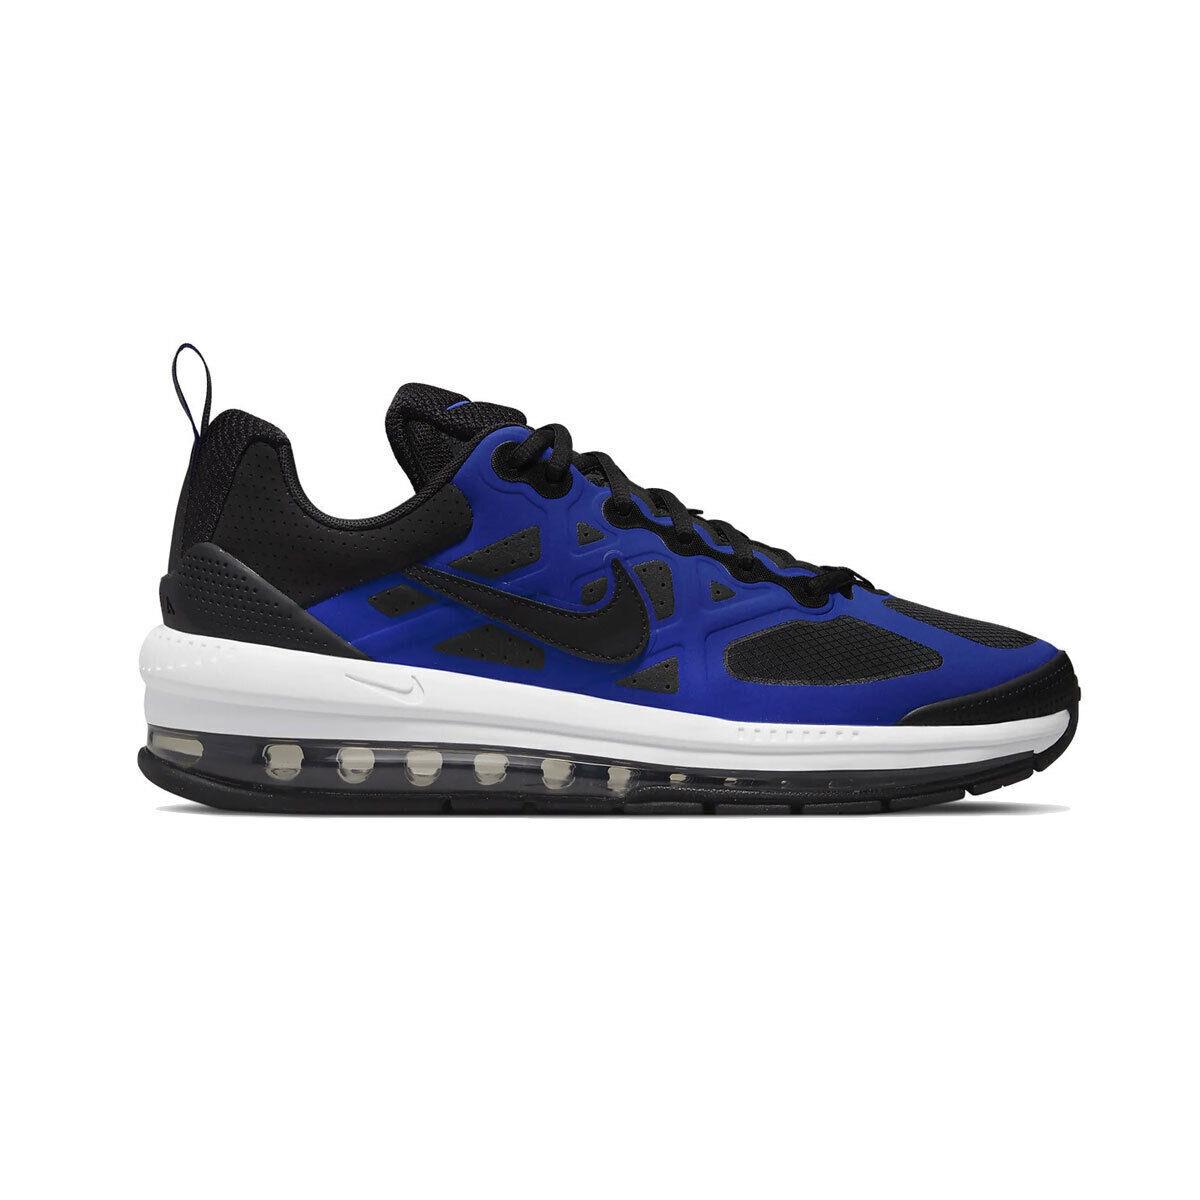 Nike Mens Air Max Genome Running Shoes DC9410 401 - RACER BLUE BLACK WHITE